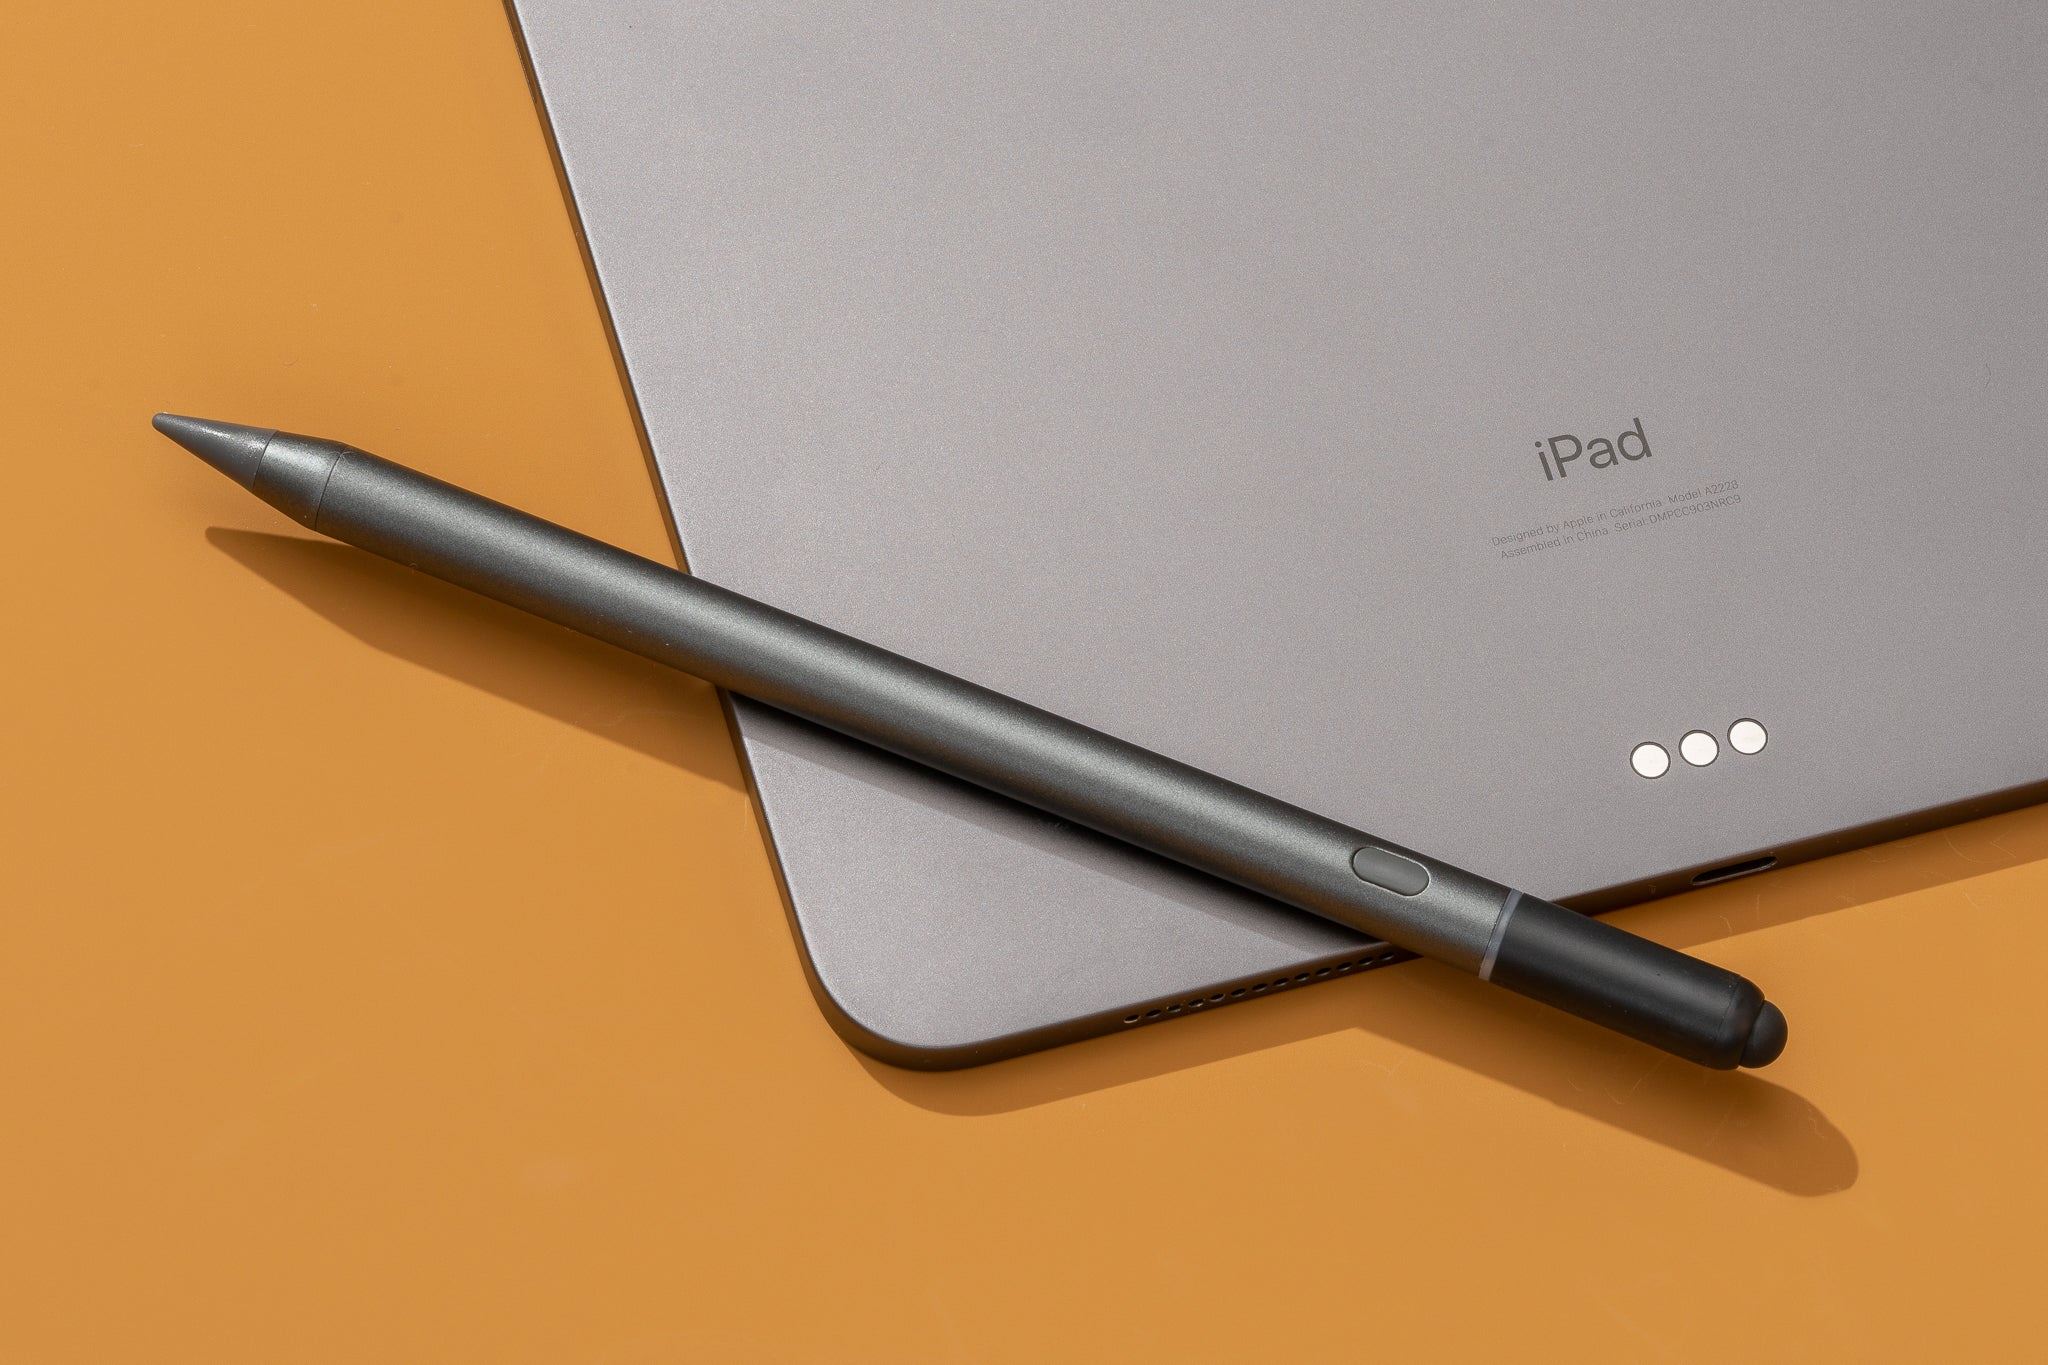 ipad-integration-connecting-your-stylus-pen